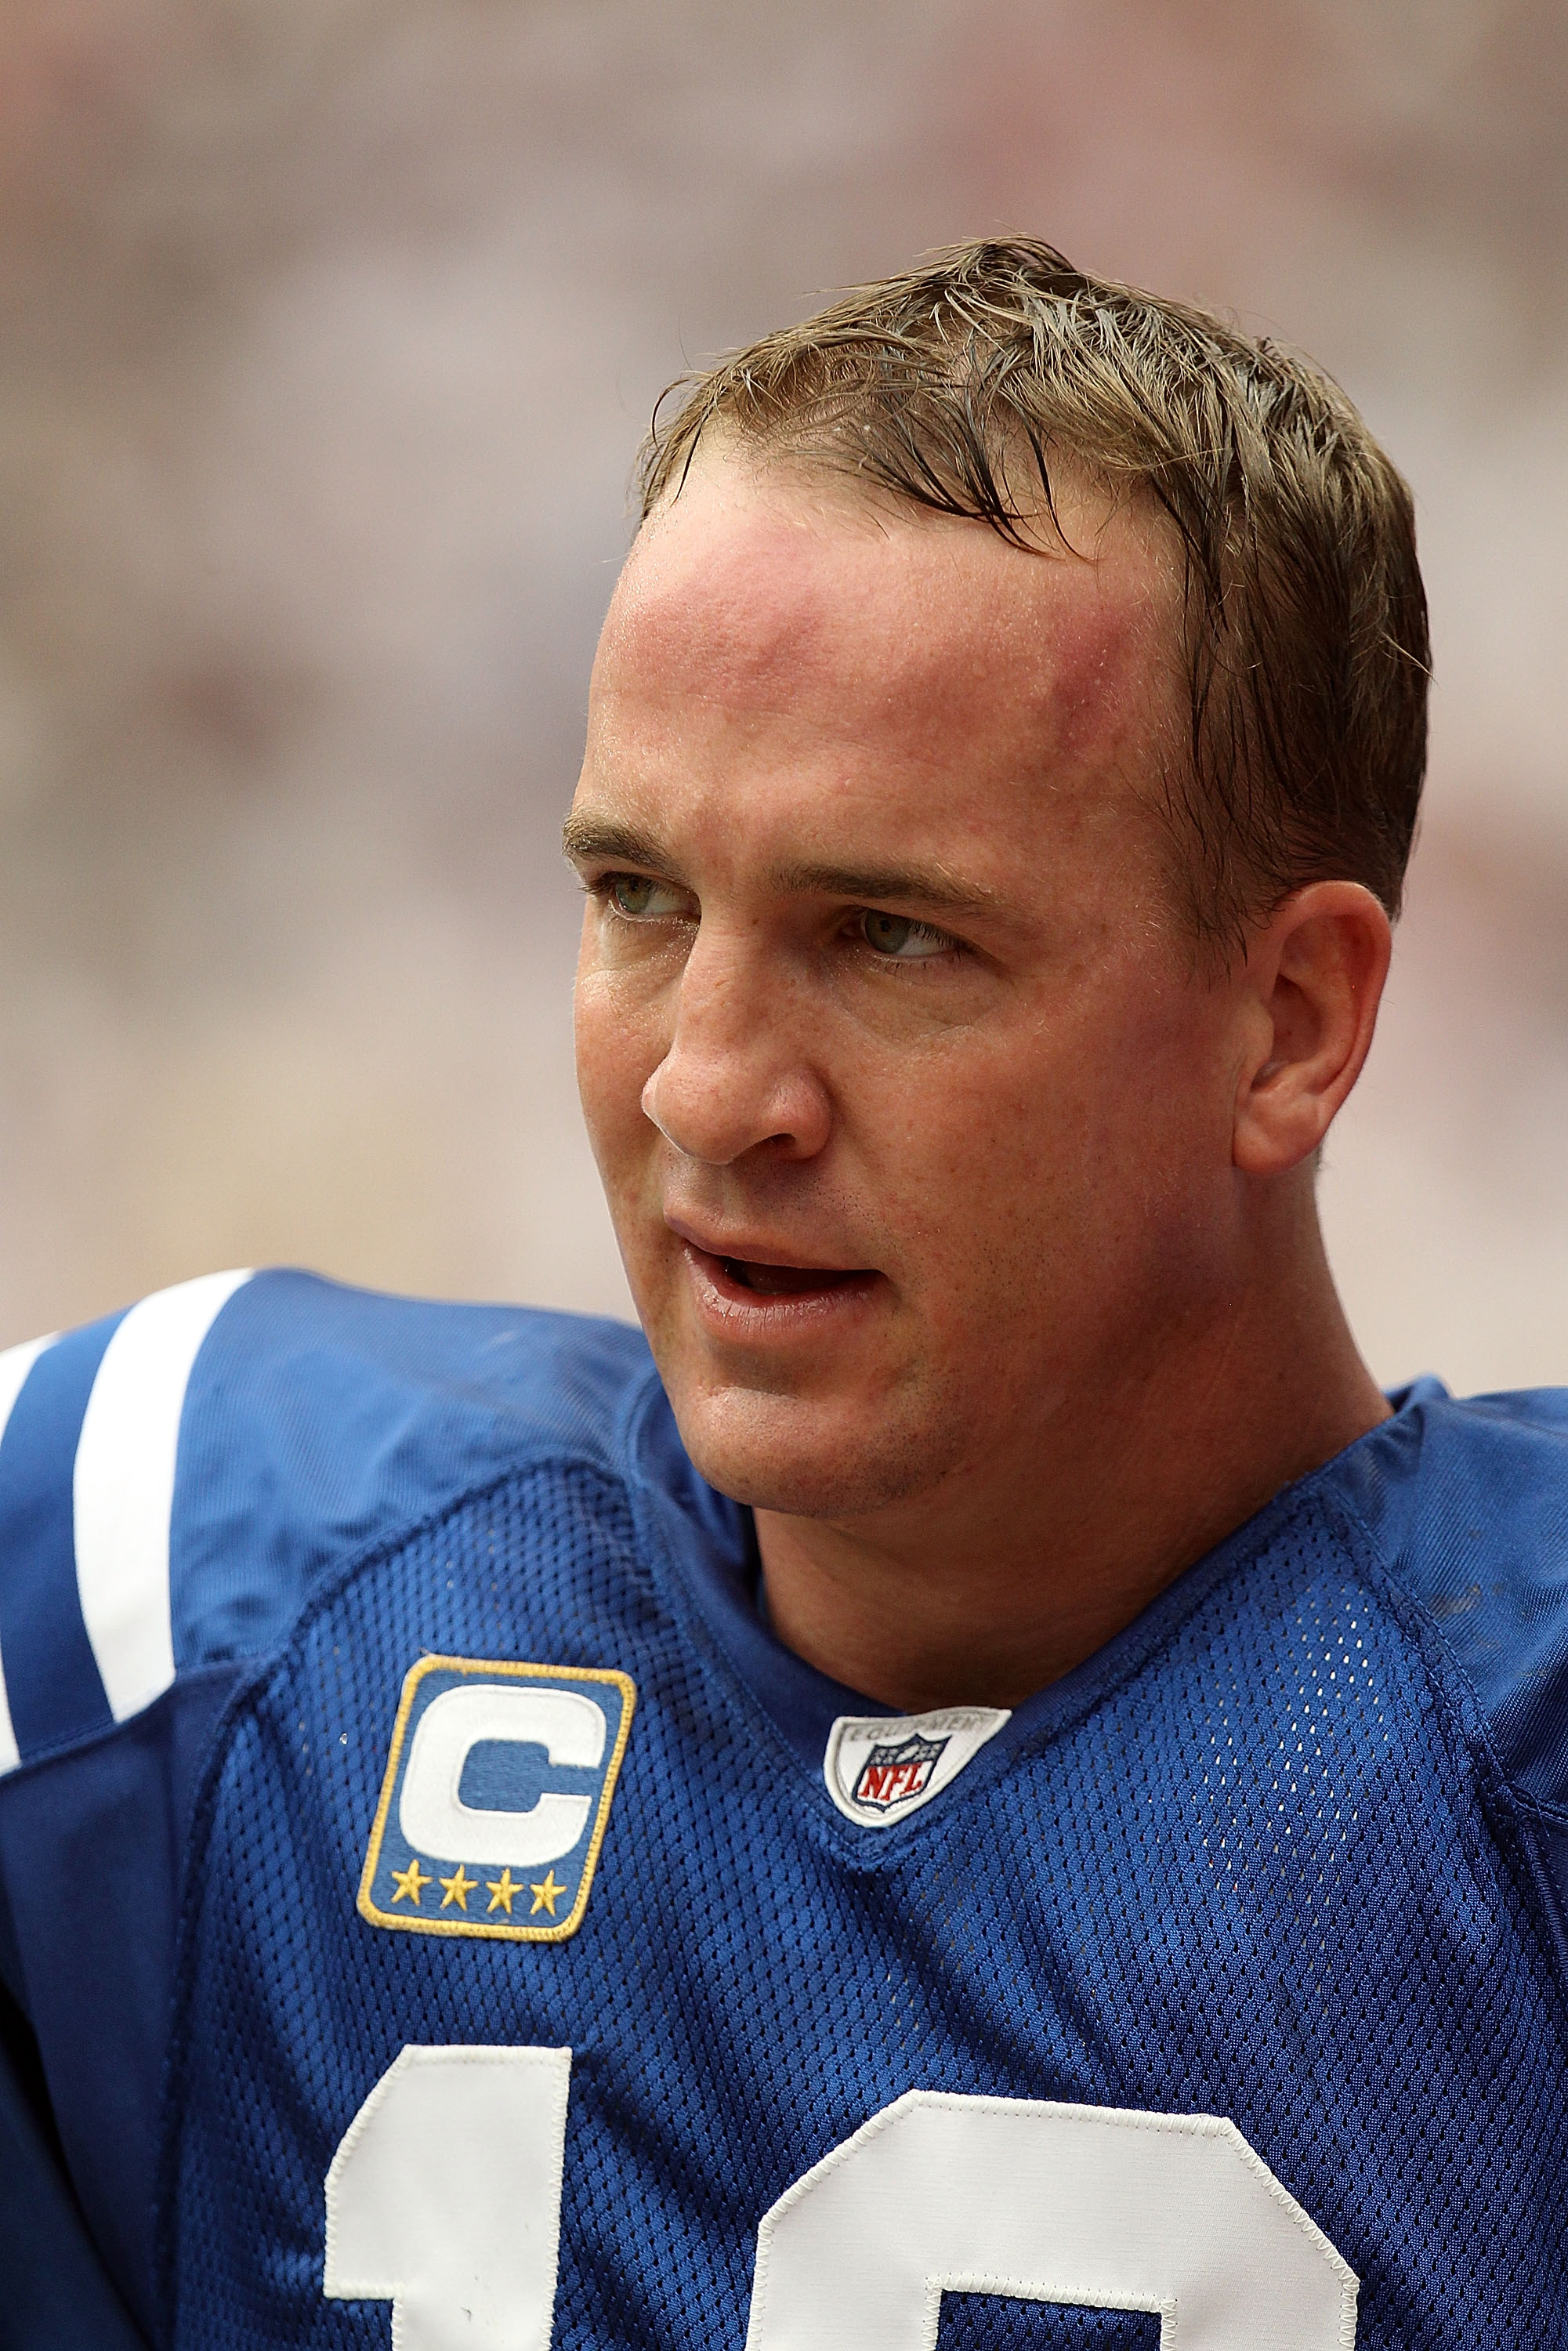 How many Pro Bowl selections did Peyton Manning receive in his career?